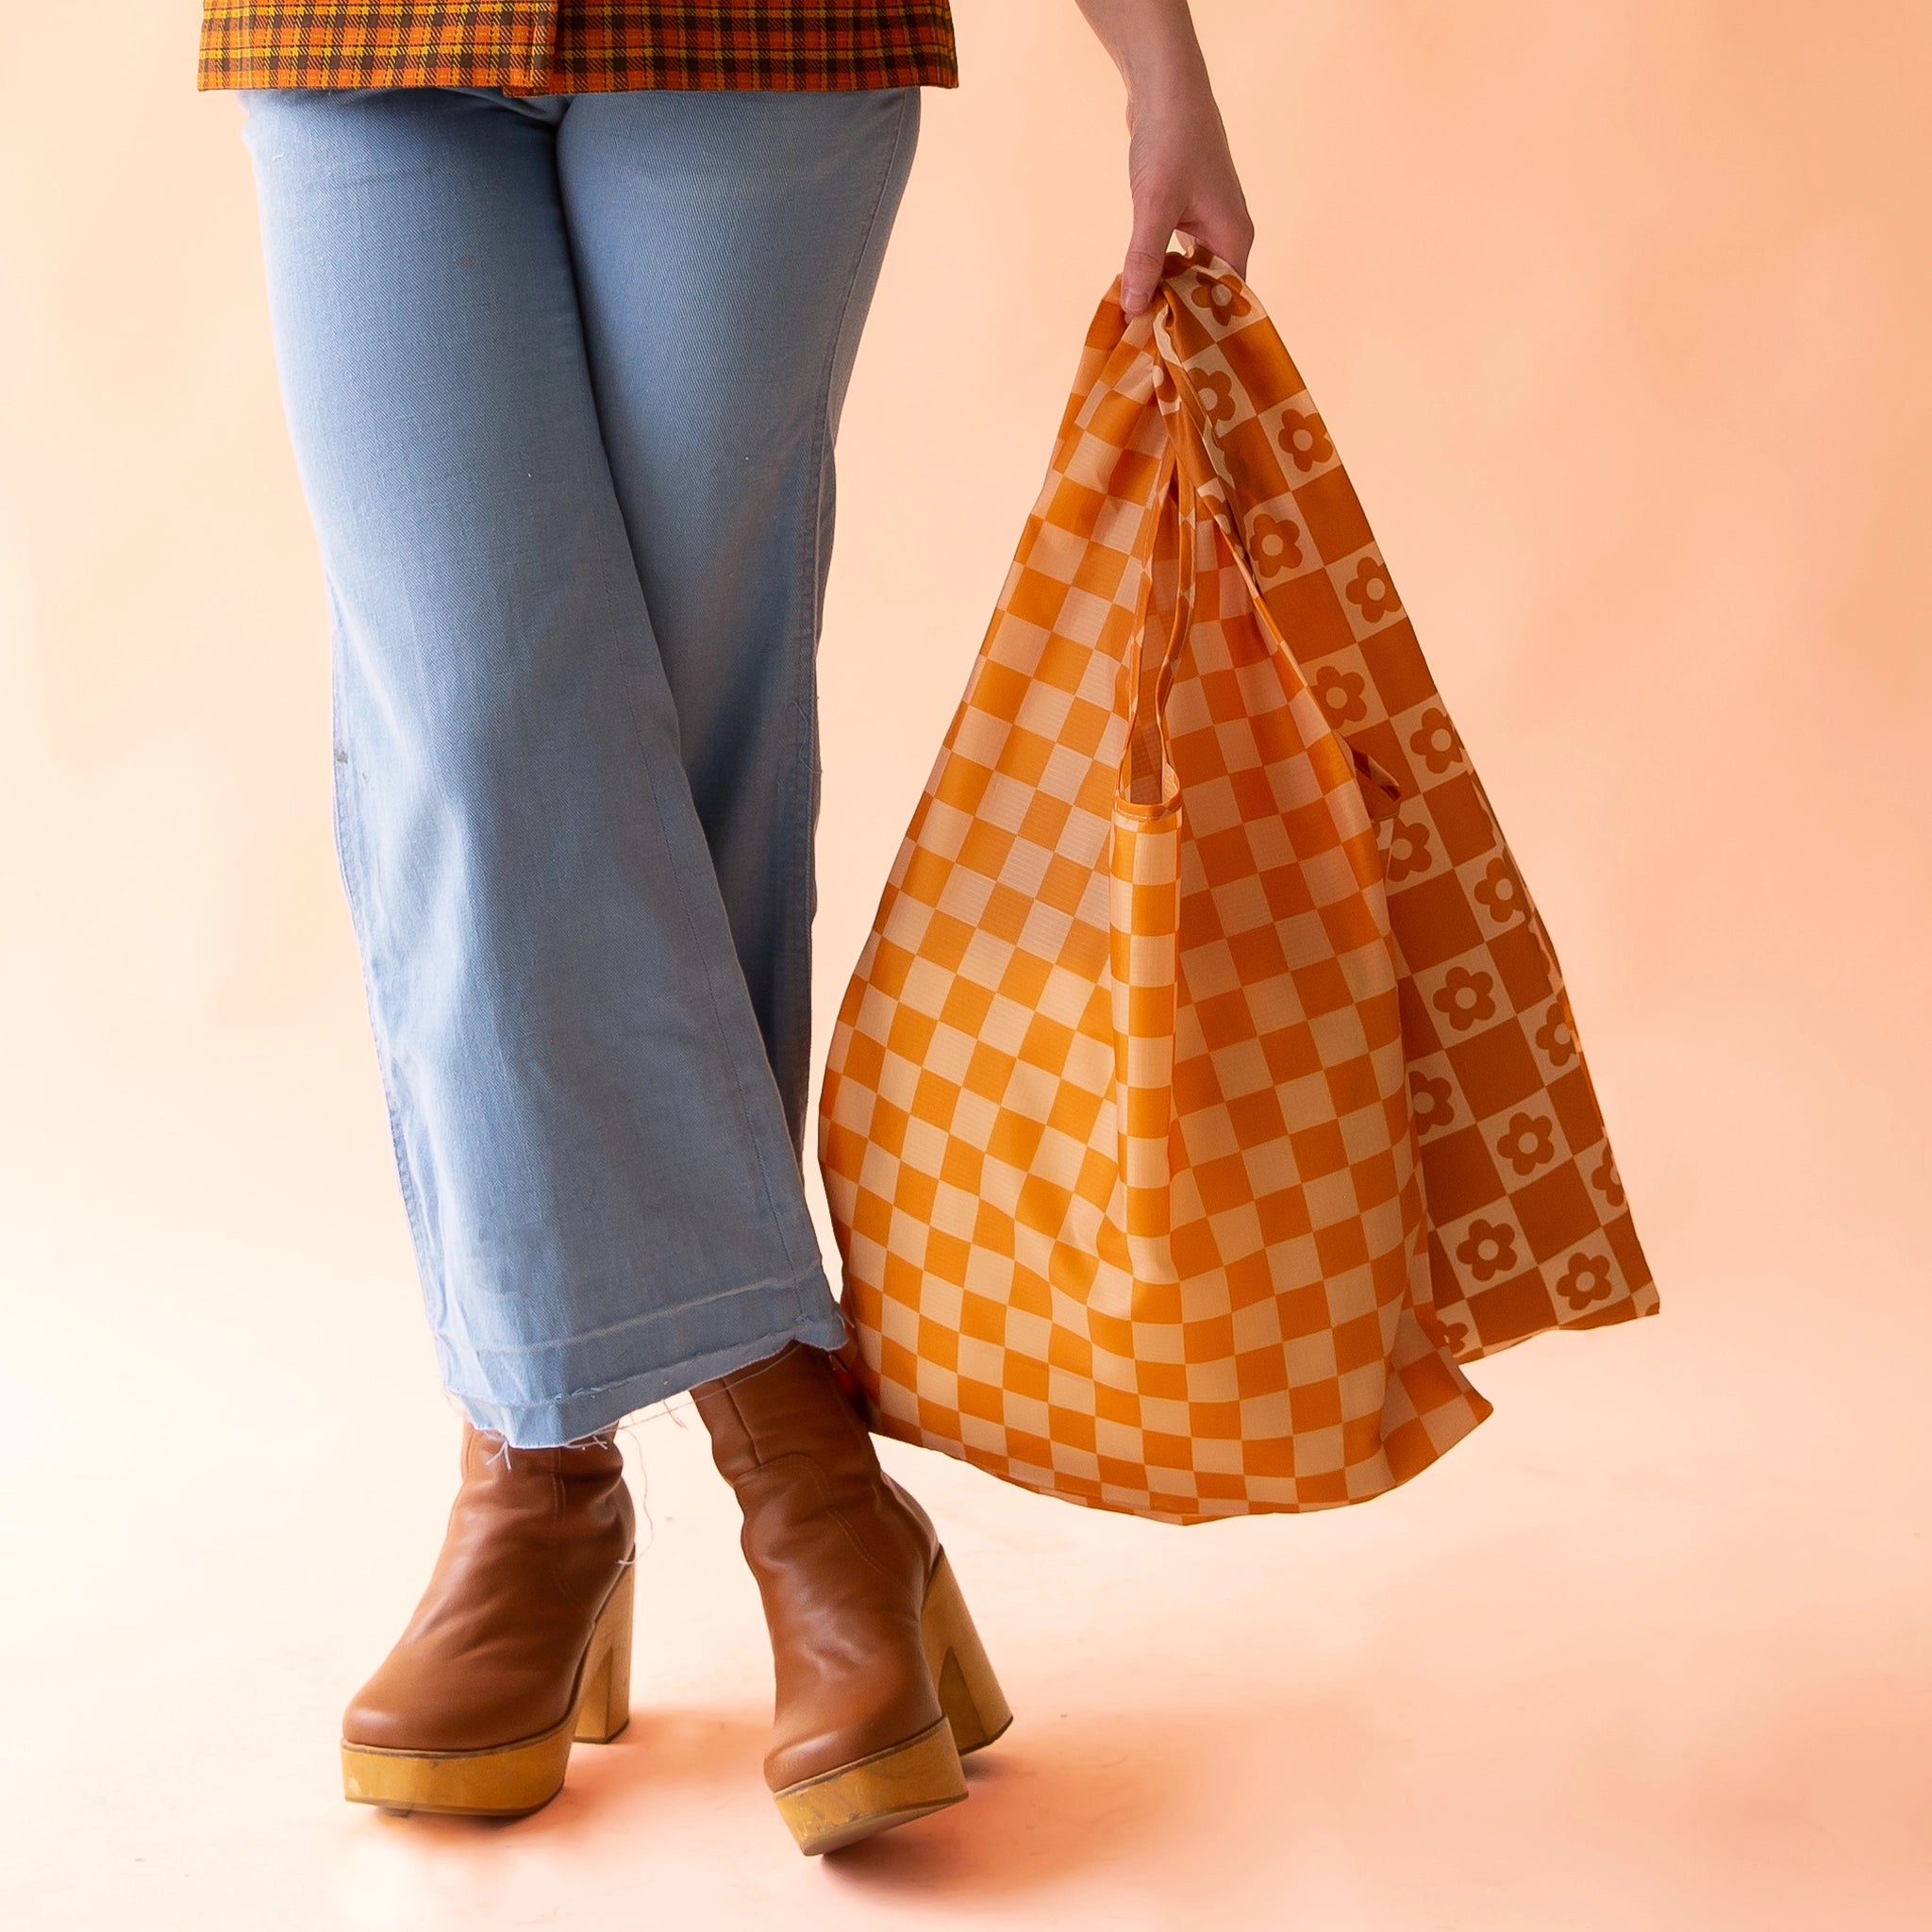 On a light peach background is a model holding two reusable nylon bags. One is a dark and light orange checkered print and the other is a burnt orange and light orange checker print with flowers in the squares.